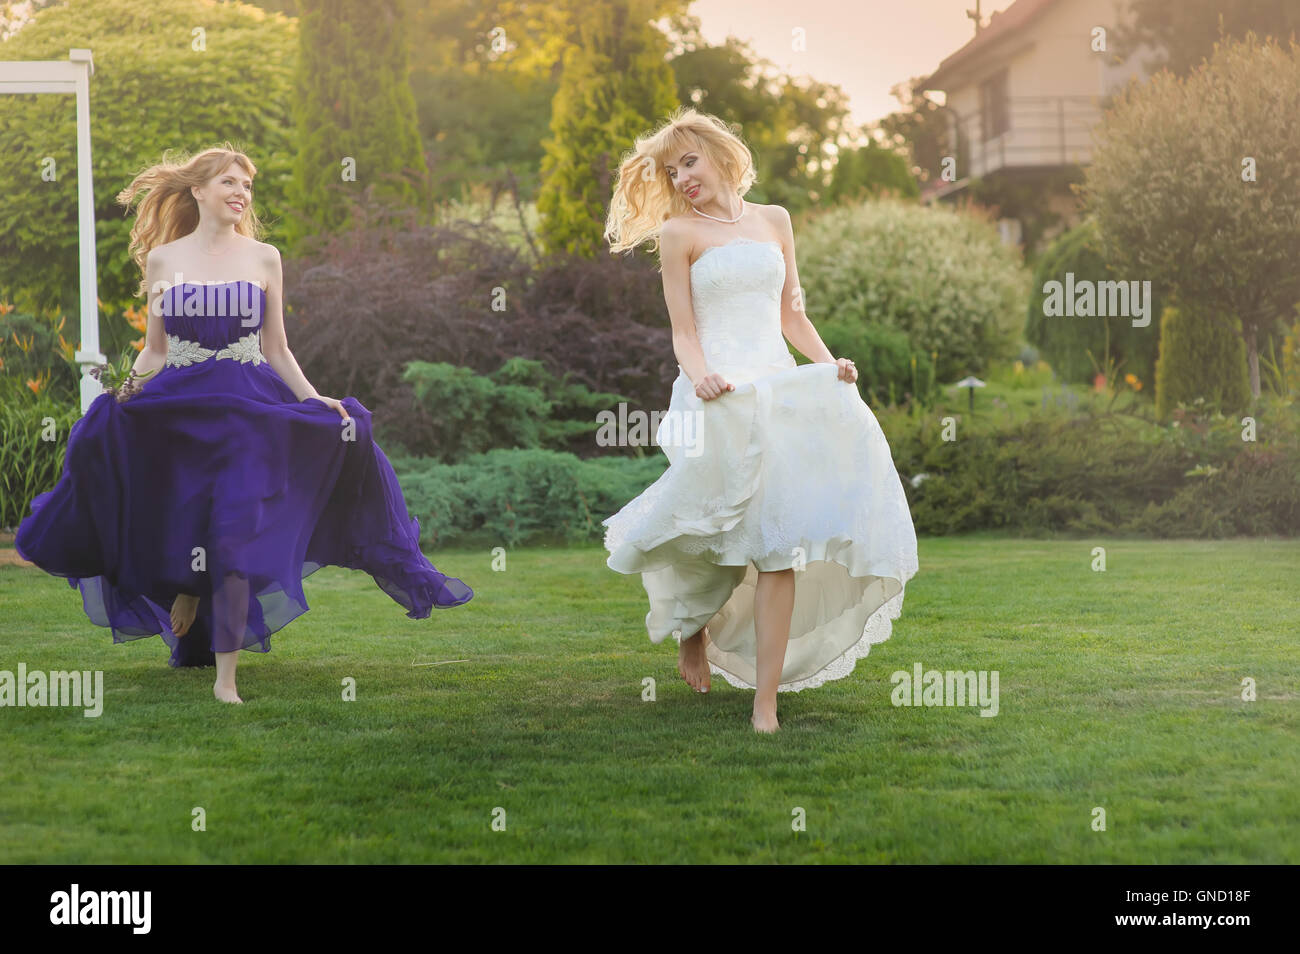 Bride and bridesmaid outside. Two beautiful girls running on lawn. Bride in wedding dress. Bridesmaid in a purple evening gown. Stock Photo